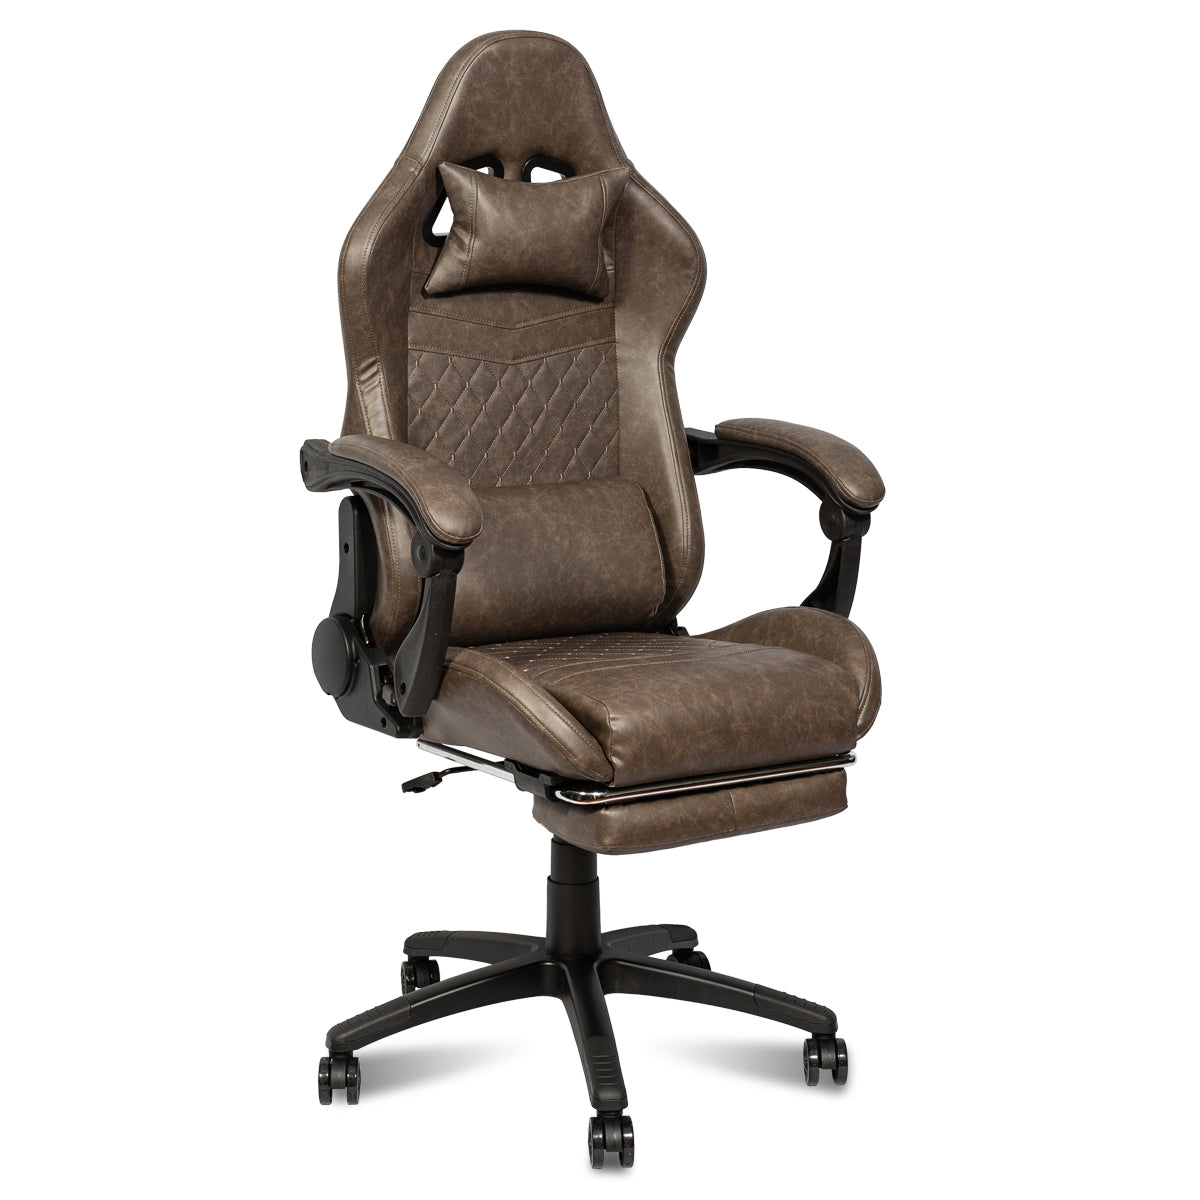 RaDEWAY Gaming Office Chairs 155 Degree Reclining Computer Chair Comfortable Executive Computer Seating Racer Recliner